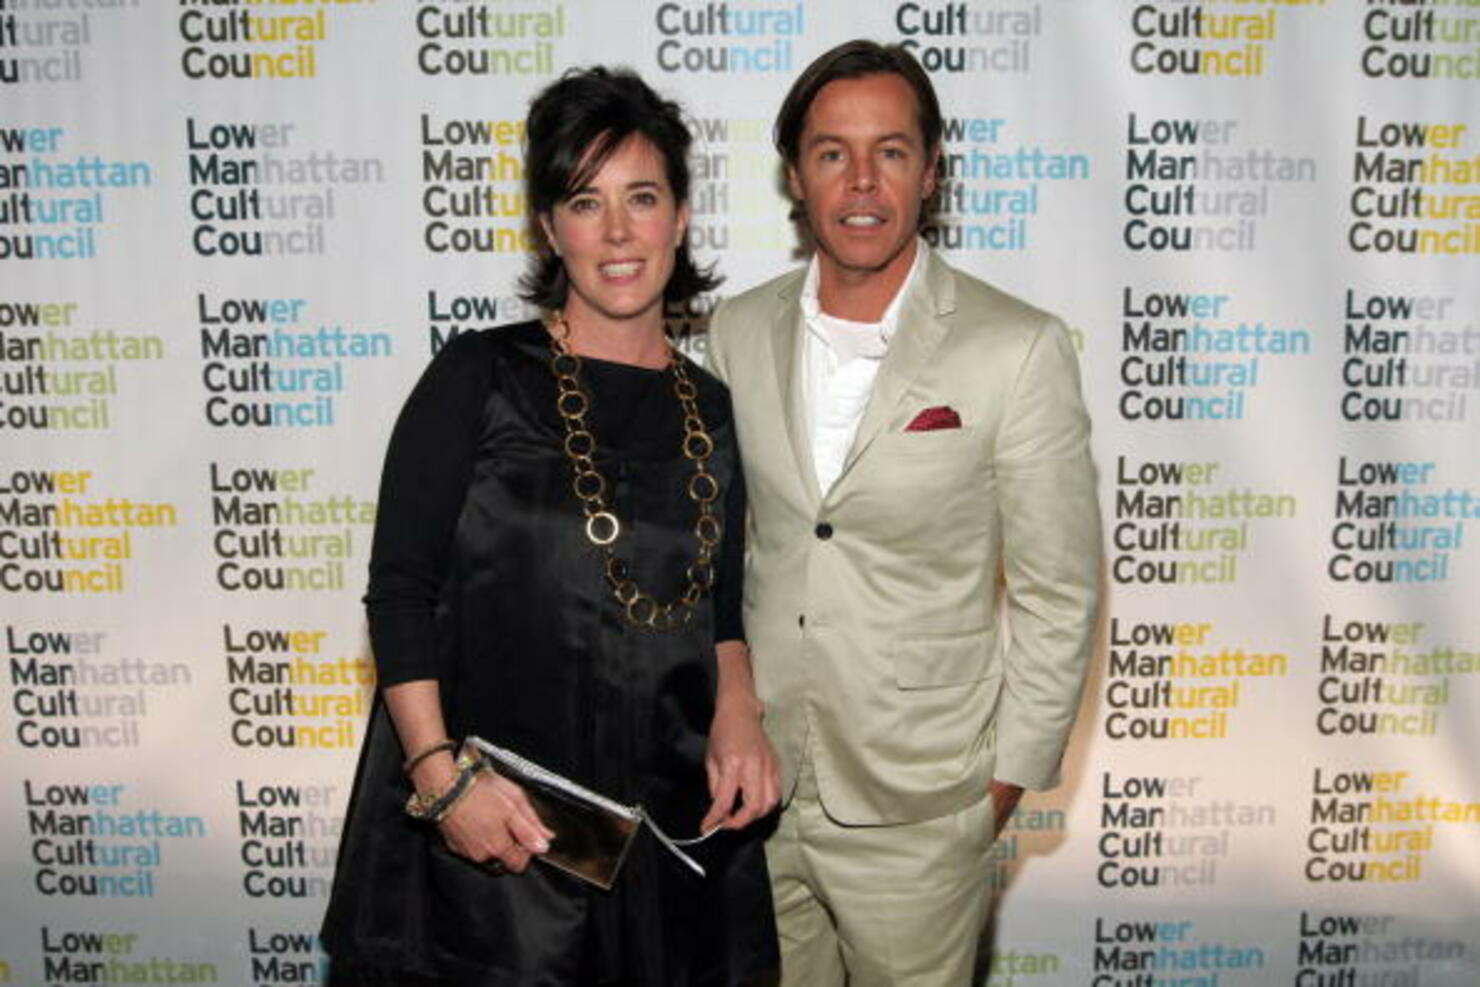 Klassifikation Shipley frø Kate Spade's suicide note to daughter stated: "Ask Daddy!" | iHeart